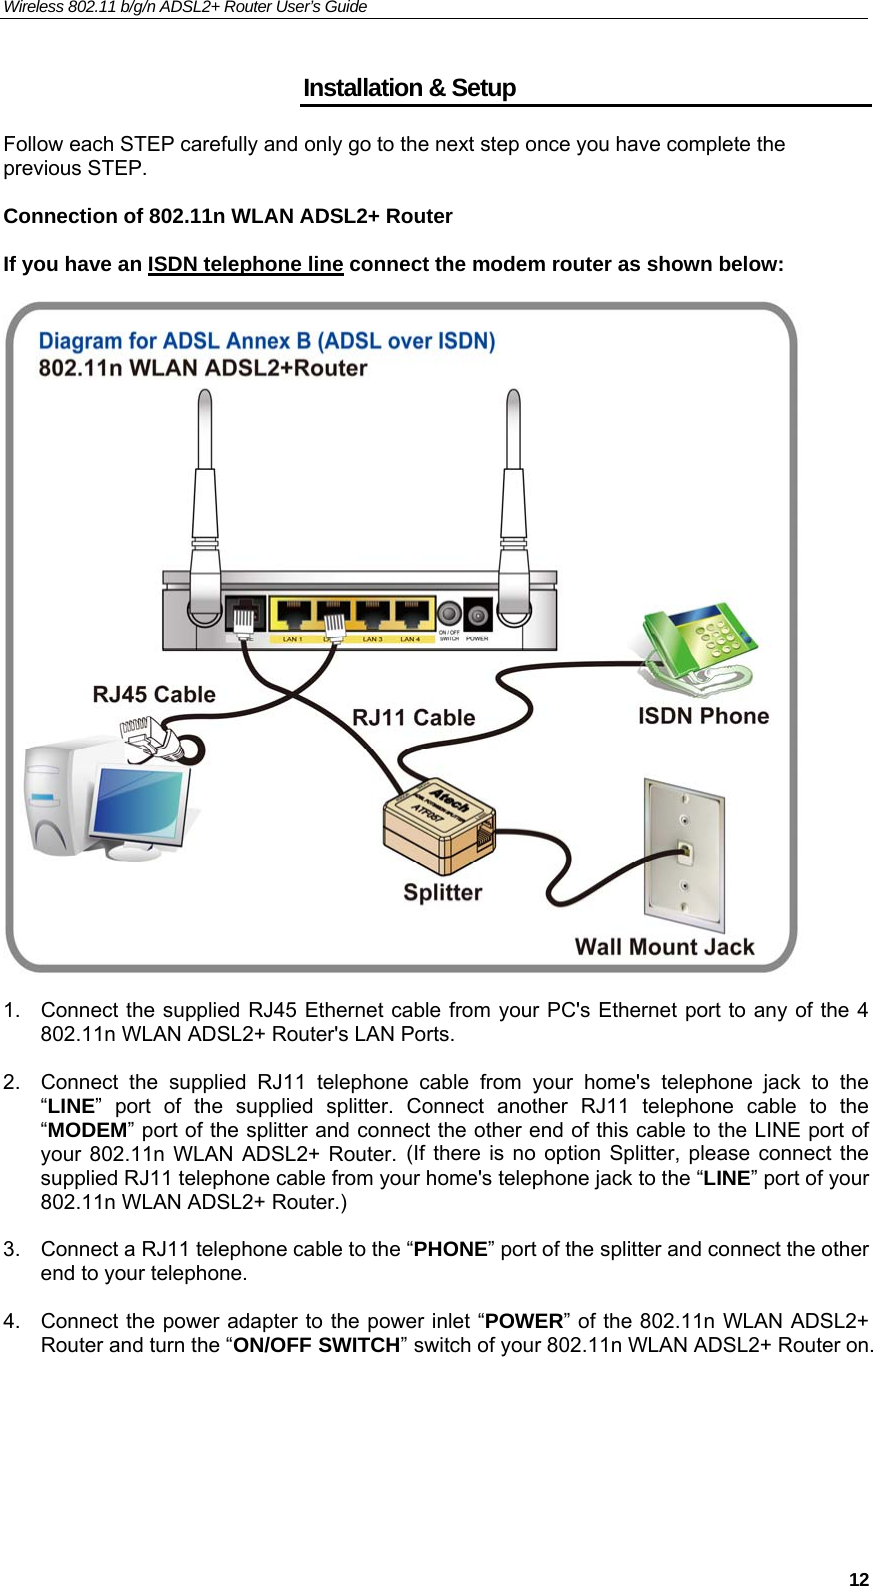 Wireless 802.11 b/g/n ADSL2+ Router User’s Guide    Installation &amp; Setup Follow each STEP carefully and only go to the next step once you have complete the previous STEP.  Connection of 802.11n WLAN ADSL2+ Router  If you have an ISDN telephone line connect the modem router as shown below:     1.  Connect the supplied RJ45 Ethernet cable from your PC&apos;s Ethernet port to any of the 4 802.11n WLAN ADSL2+ Router&apos;s LAN Ports.  2.  Connect the supplied RJ11 telephone cable from your home&apos;s telephone jack to the “LINE” port of the supplied splitter. Connect another RJ11 telephone cable to the “MODEM” port of the splitter and connect the other end of this cable to the LINE port of your 802.11n WLAN ADSL2+ Router. (If there is no option Splitter, please connect the supplied RJ11 telephone cable from your home&apos;s telephone jack to the “LINE” port of your 802.11n WLAN ADSL2+ Router.)  3.  Connect a RJ11 telephone cable to the “PHONE” port of the splitter and connect the other end to your telephone.  4.  Connect the power adapter to the power inlet “POWER” of the 802.11n WLAN ADSL2+ Router and turn the “ON/OFF SWITCH” switch of your 802.11n WLAN ADSL2+ Router on.      12